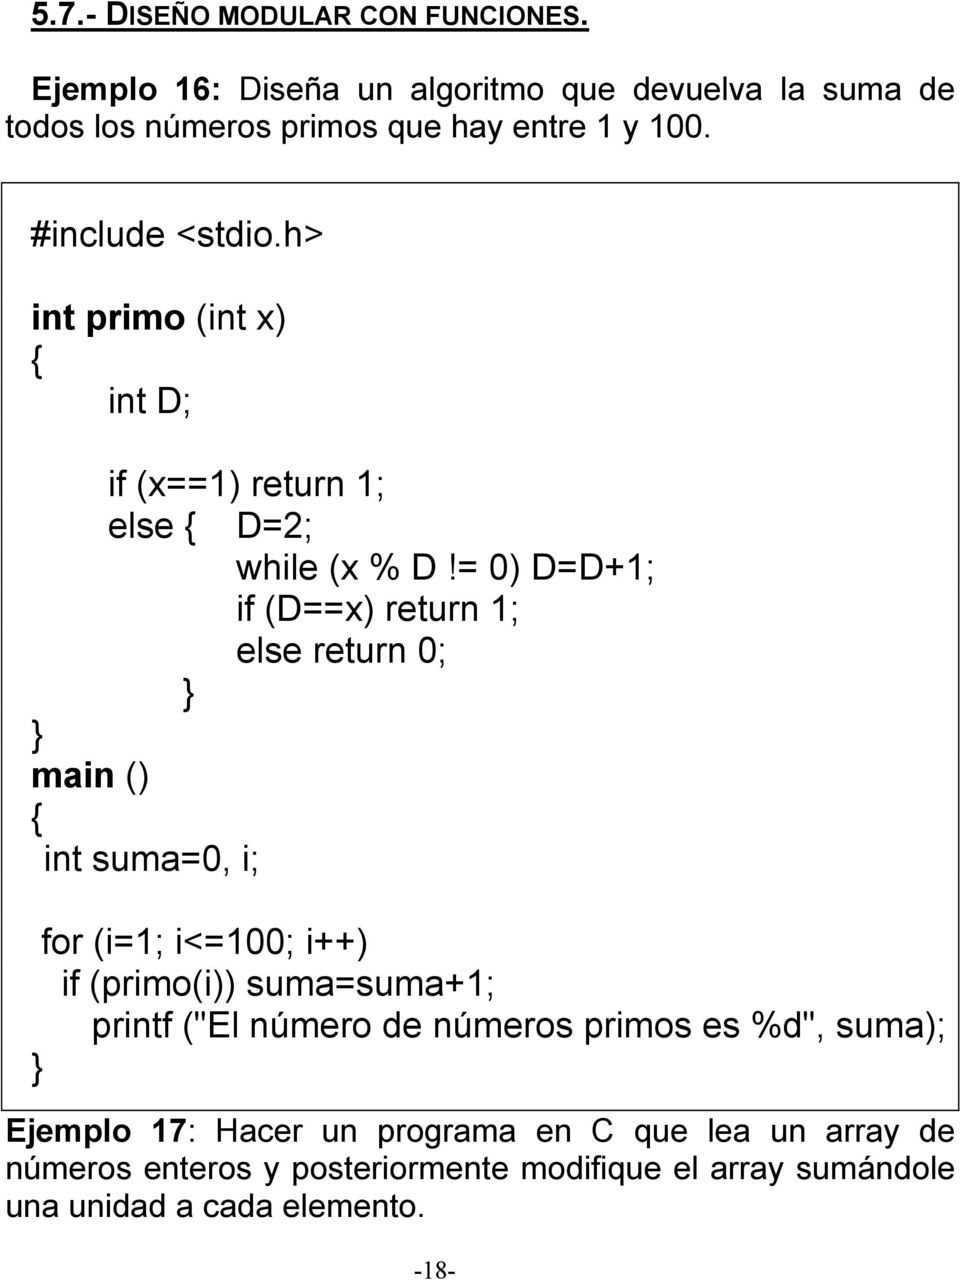 int primo (int x) int D; if (x==1) return 1; else D=2; while (x % D!